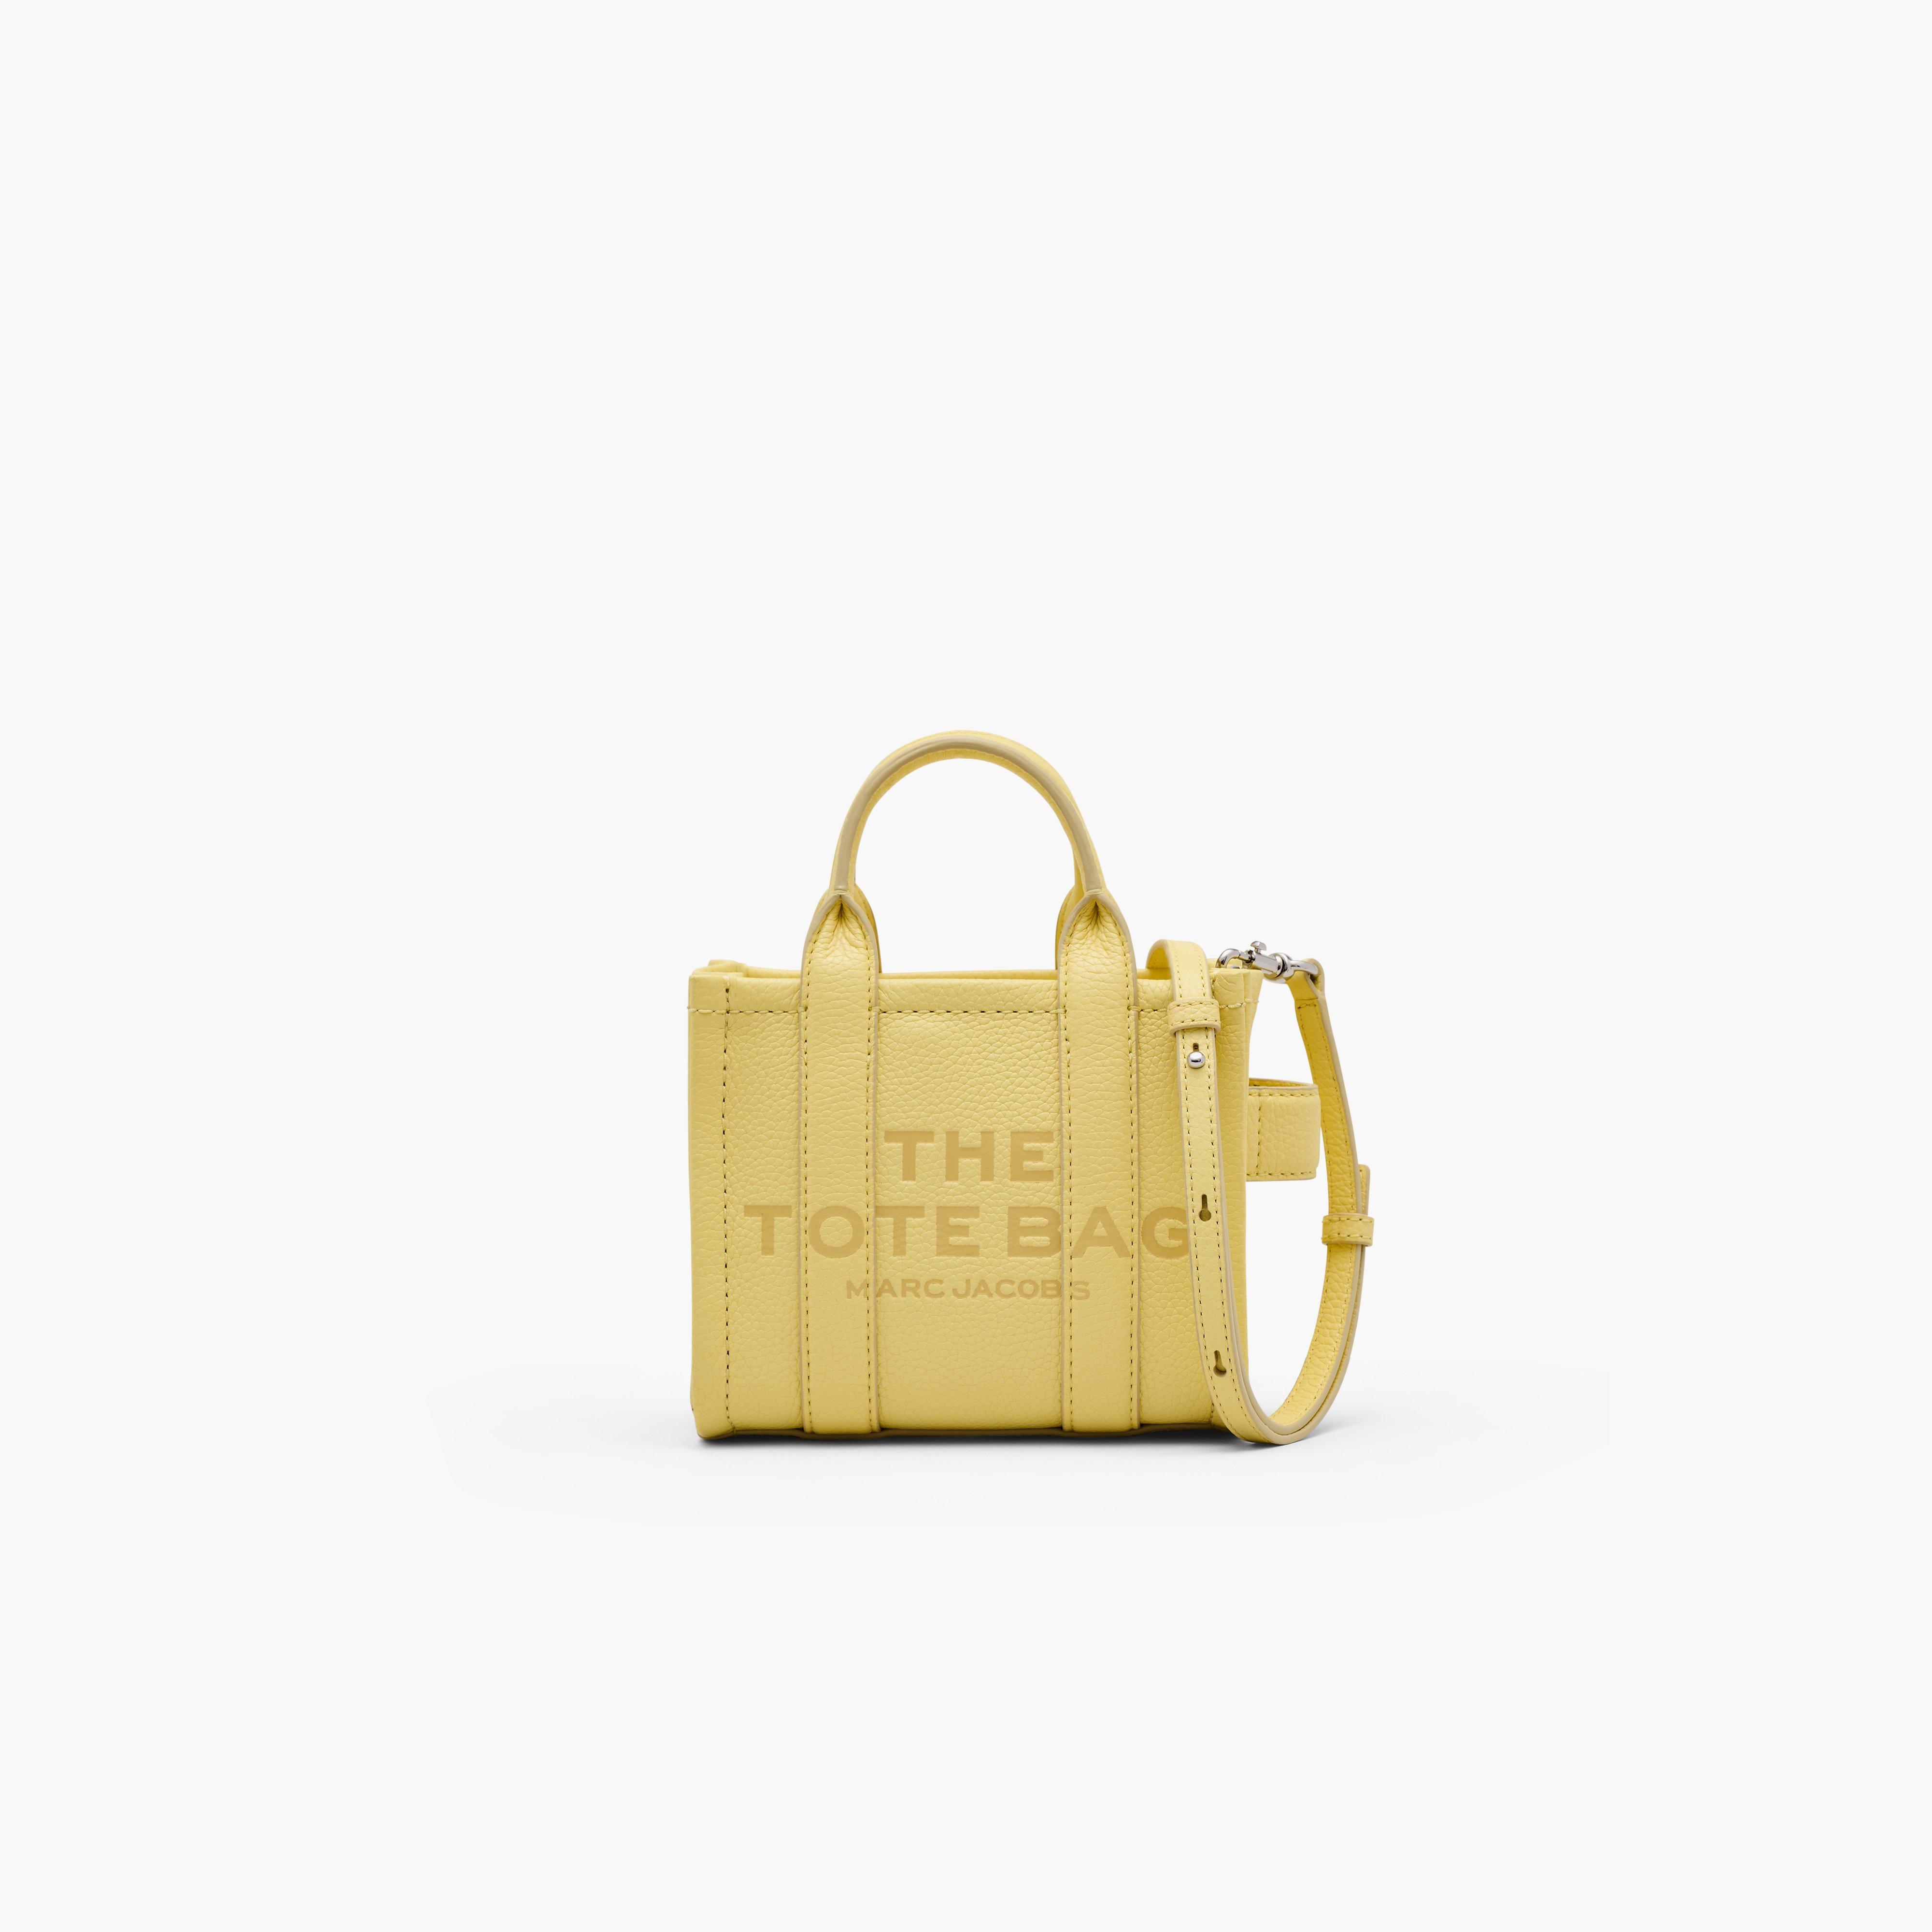 Marc by Marc jacobs The Leather Mini Tote Bag,CUSTARD